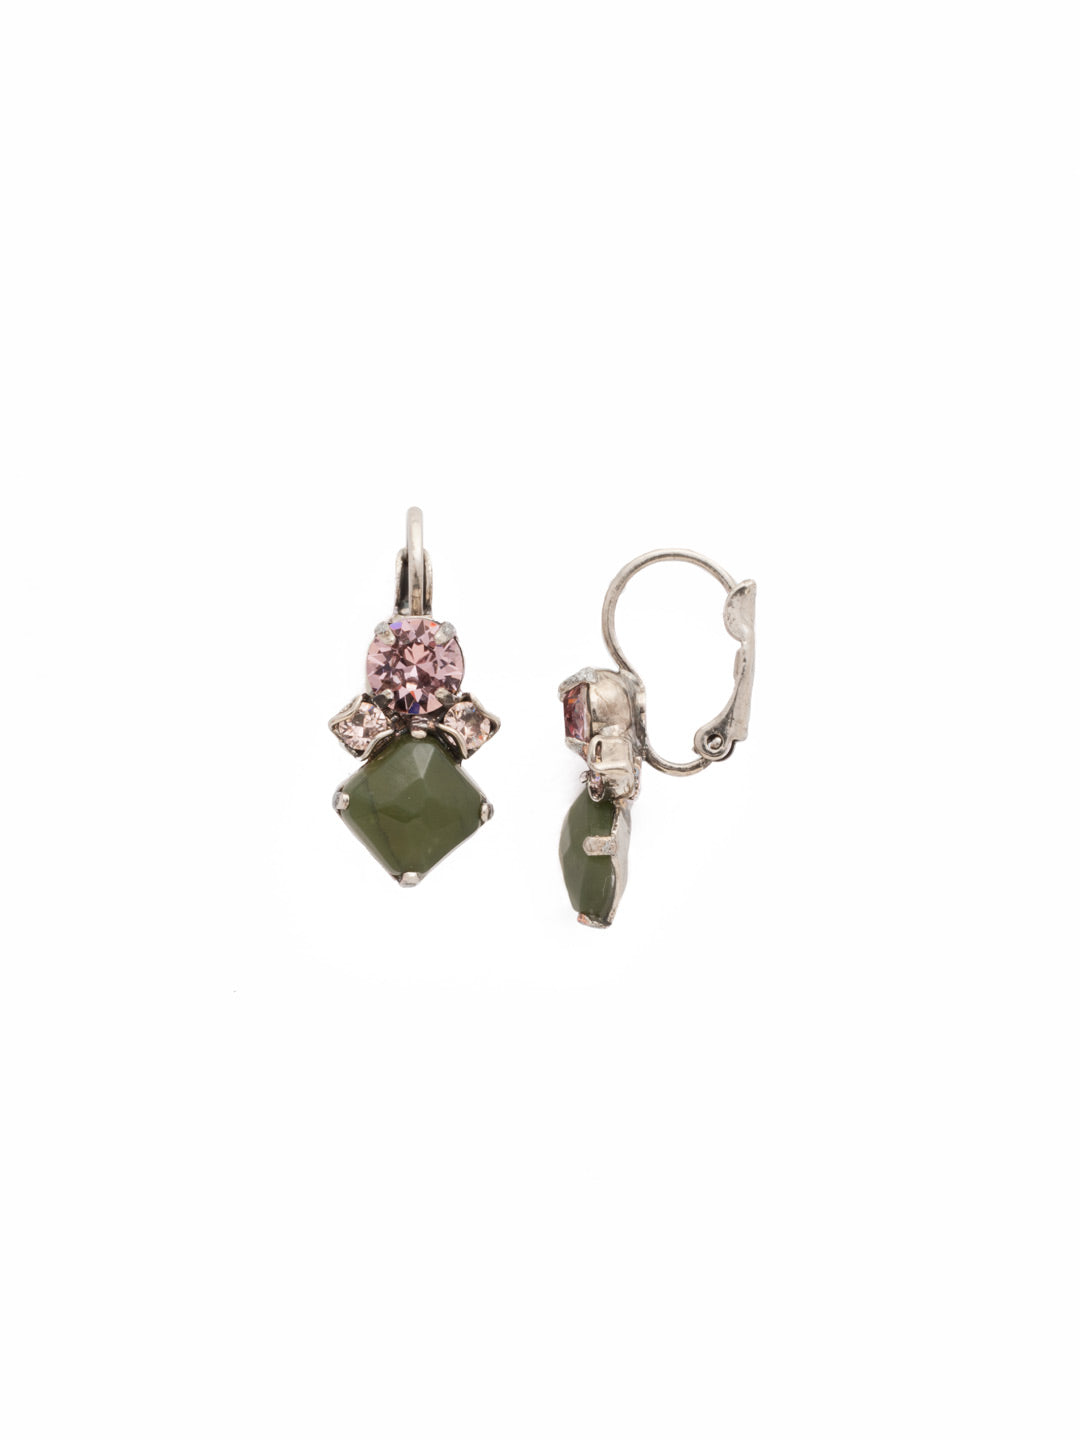 Gingham French Wire Earring - EDH50ASAG - Our Gingham French Wire Earring features a small crystal cluster sitting atop a diamond-shaped semi-precious stone. Add these earrings to any outfit for a unique look!